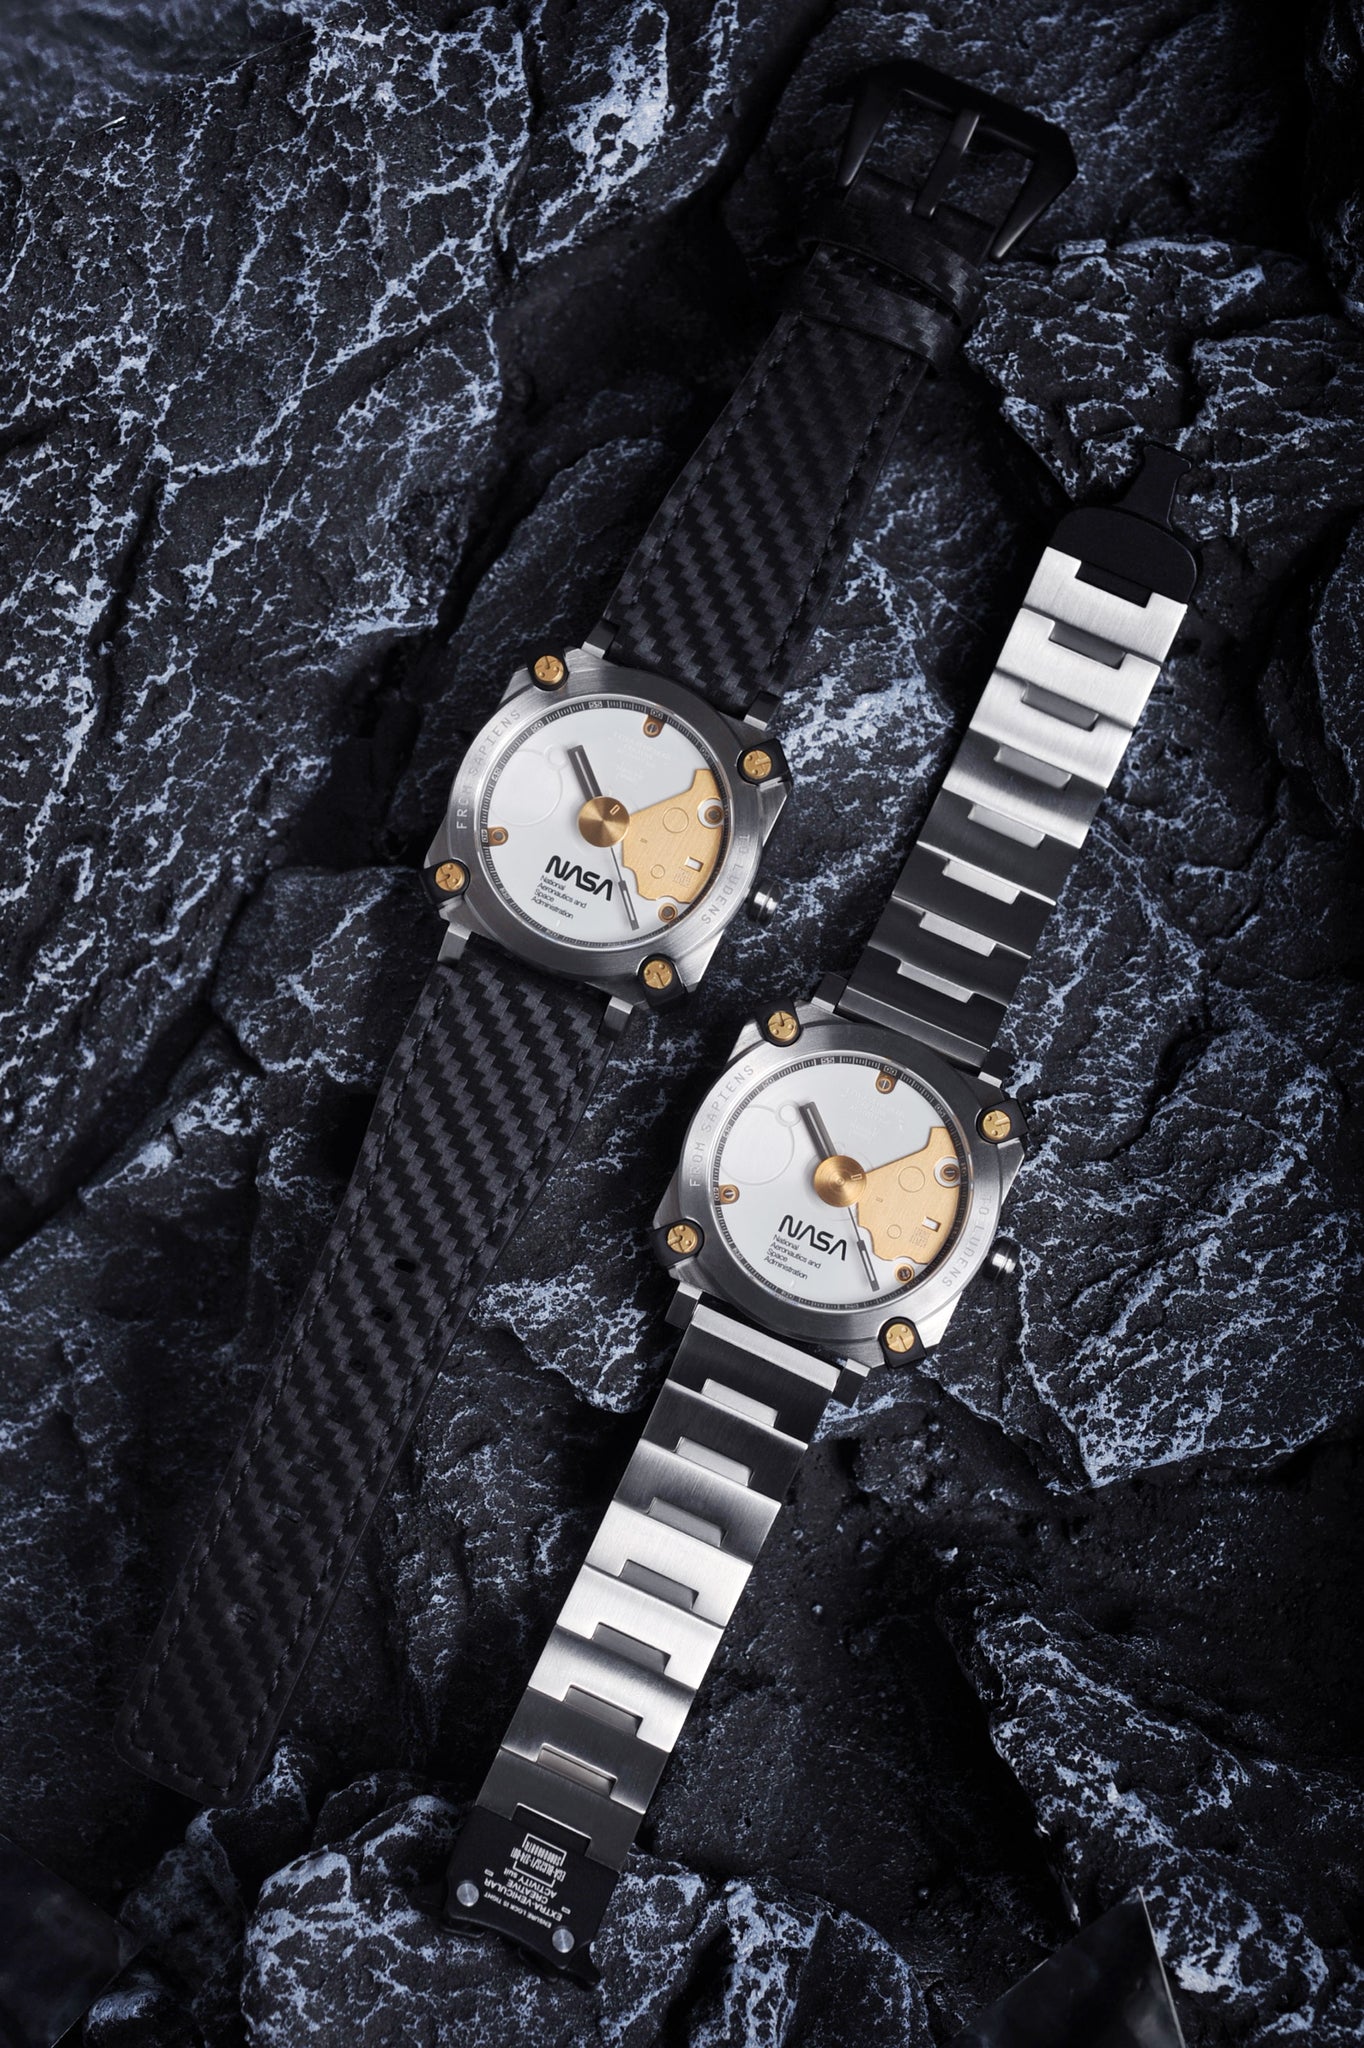 SPACE LUDENS includes two straps for different styling: a stainless steel bracelet featuring the buckle straps of the Ludens; and a carbon fiber pattern leather strap for lighter activities. The choice of carbon fiber printed is a reflection on the skull mask motif of Ludens.